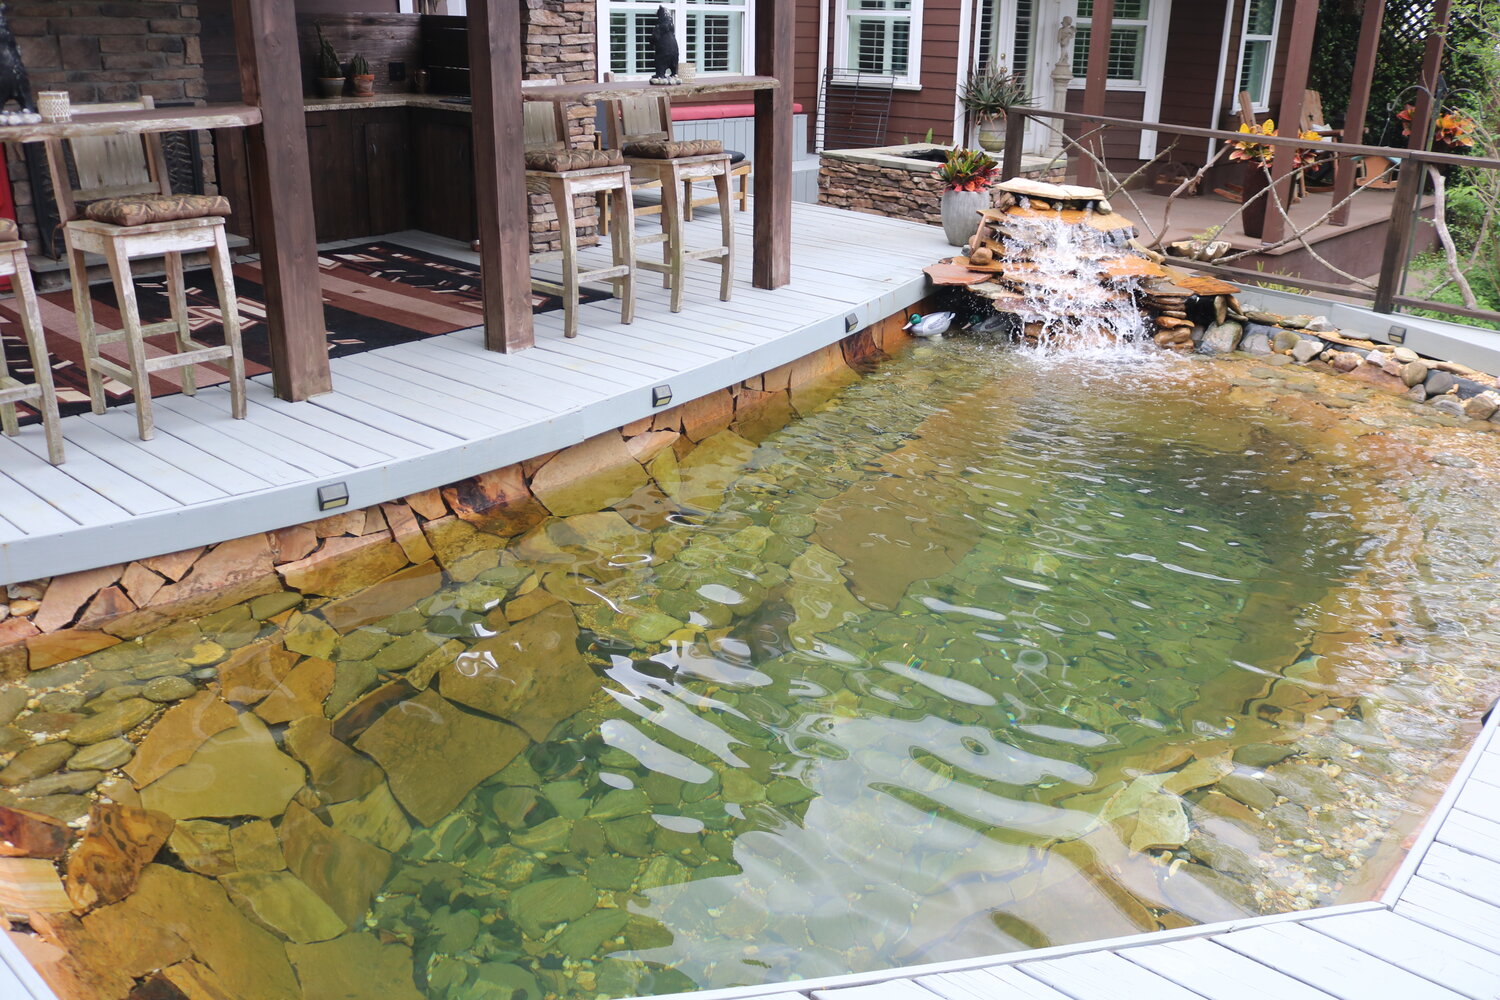 Koi ponds can add to an outdoor space.